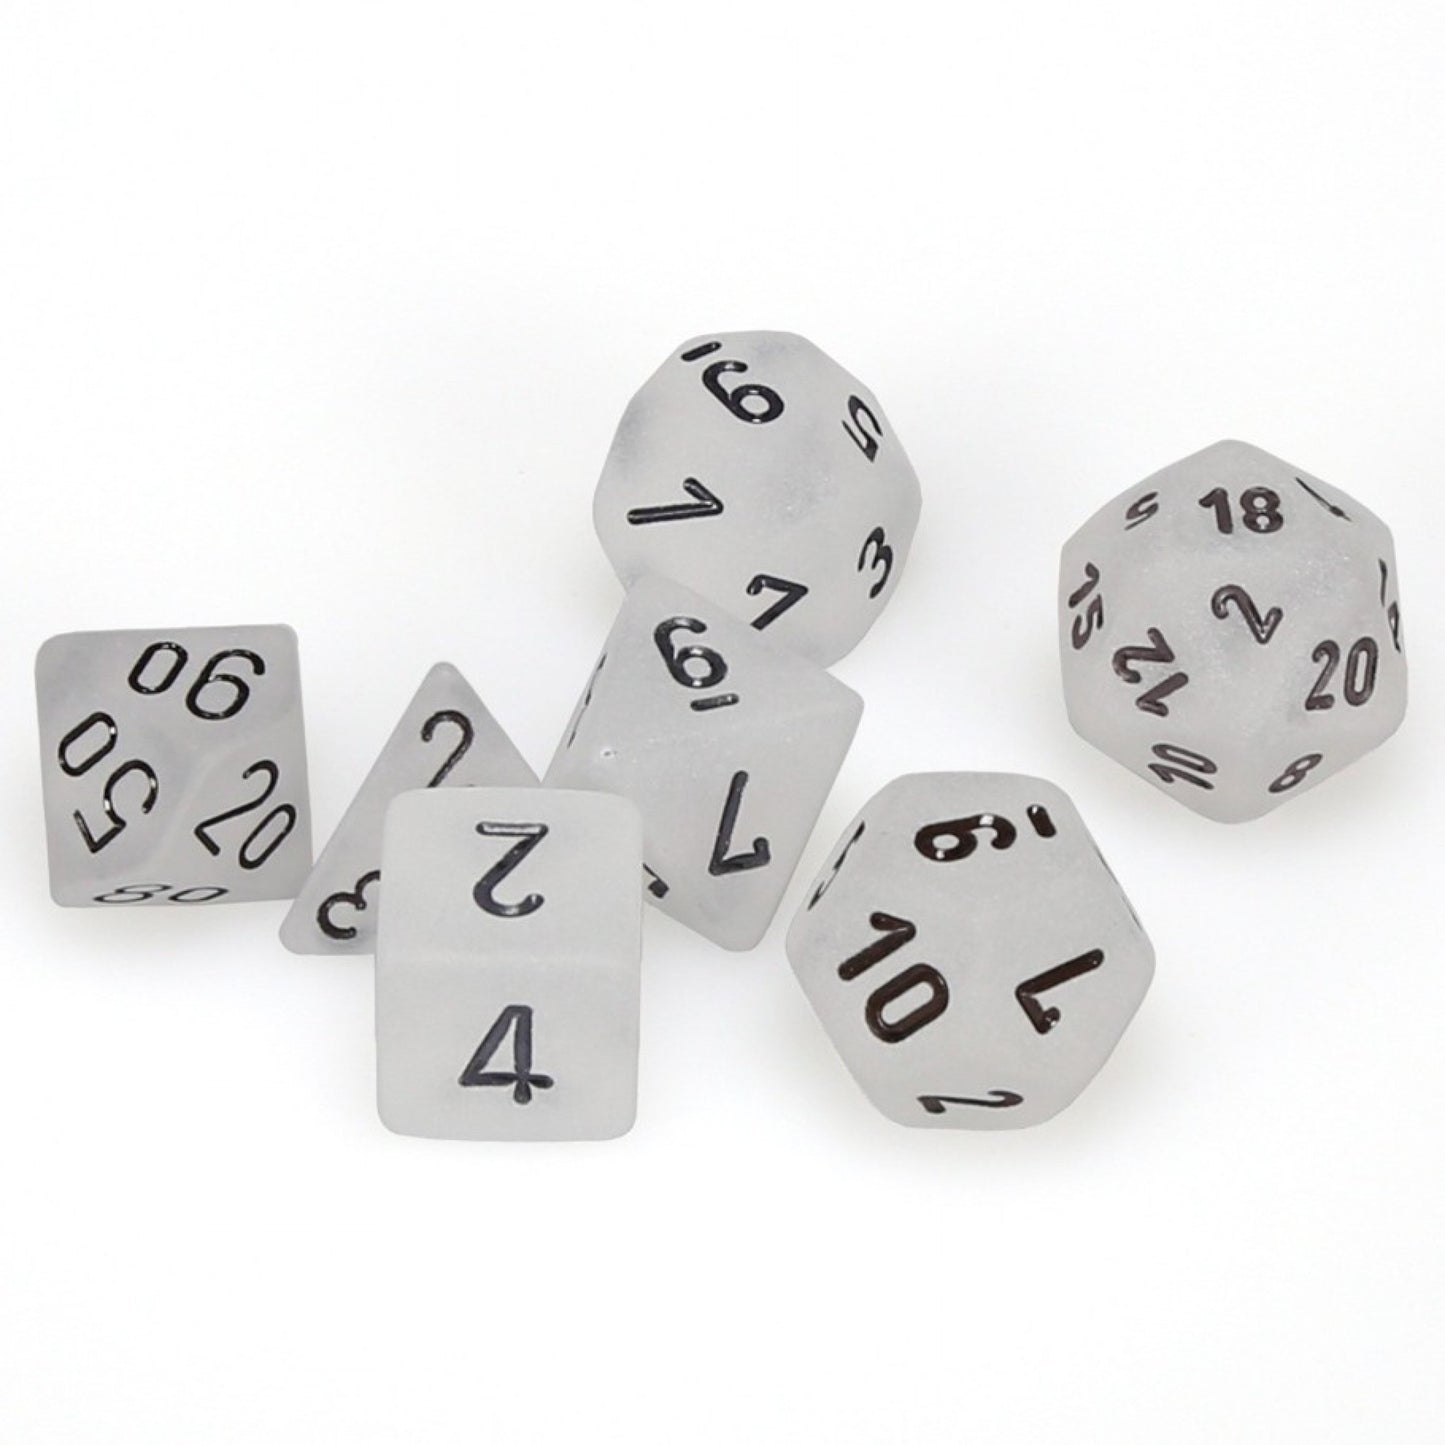 CHESSEX 7 DIE POLYHEDRAL DICE SET: FROSTED CLEAR WITH BLACK